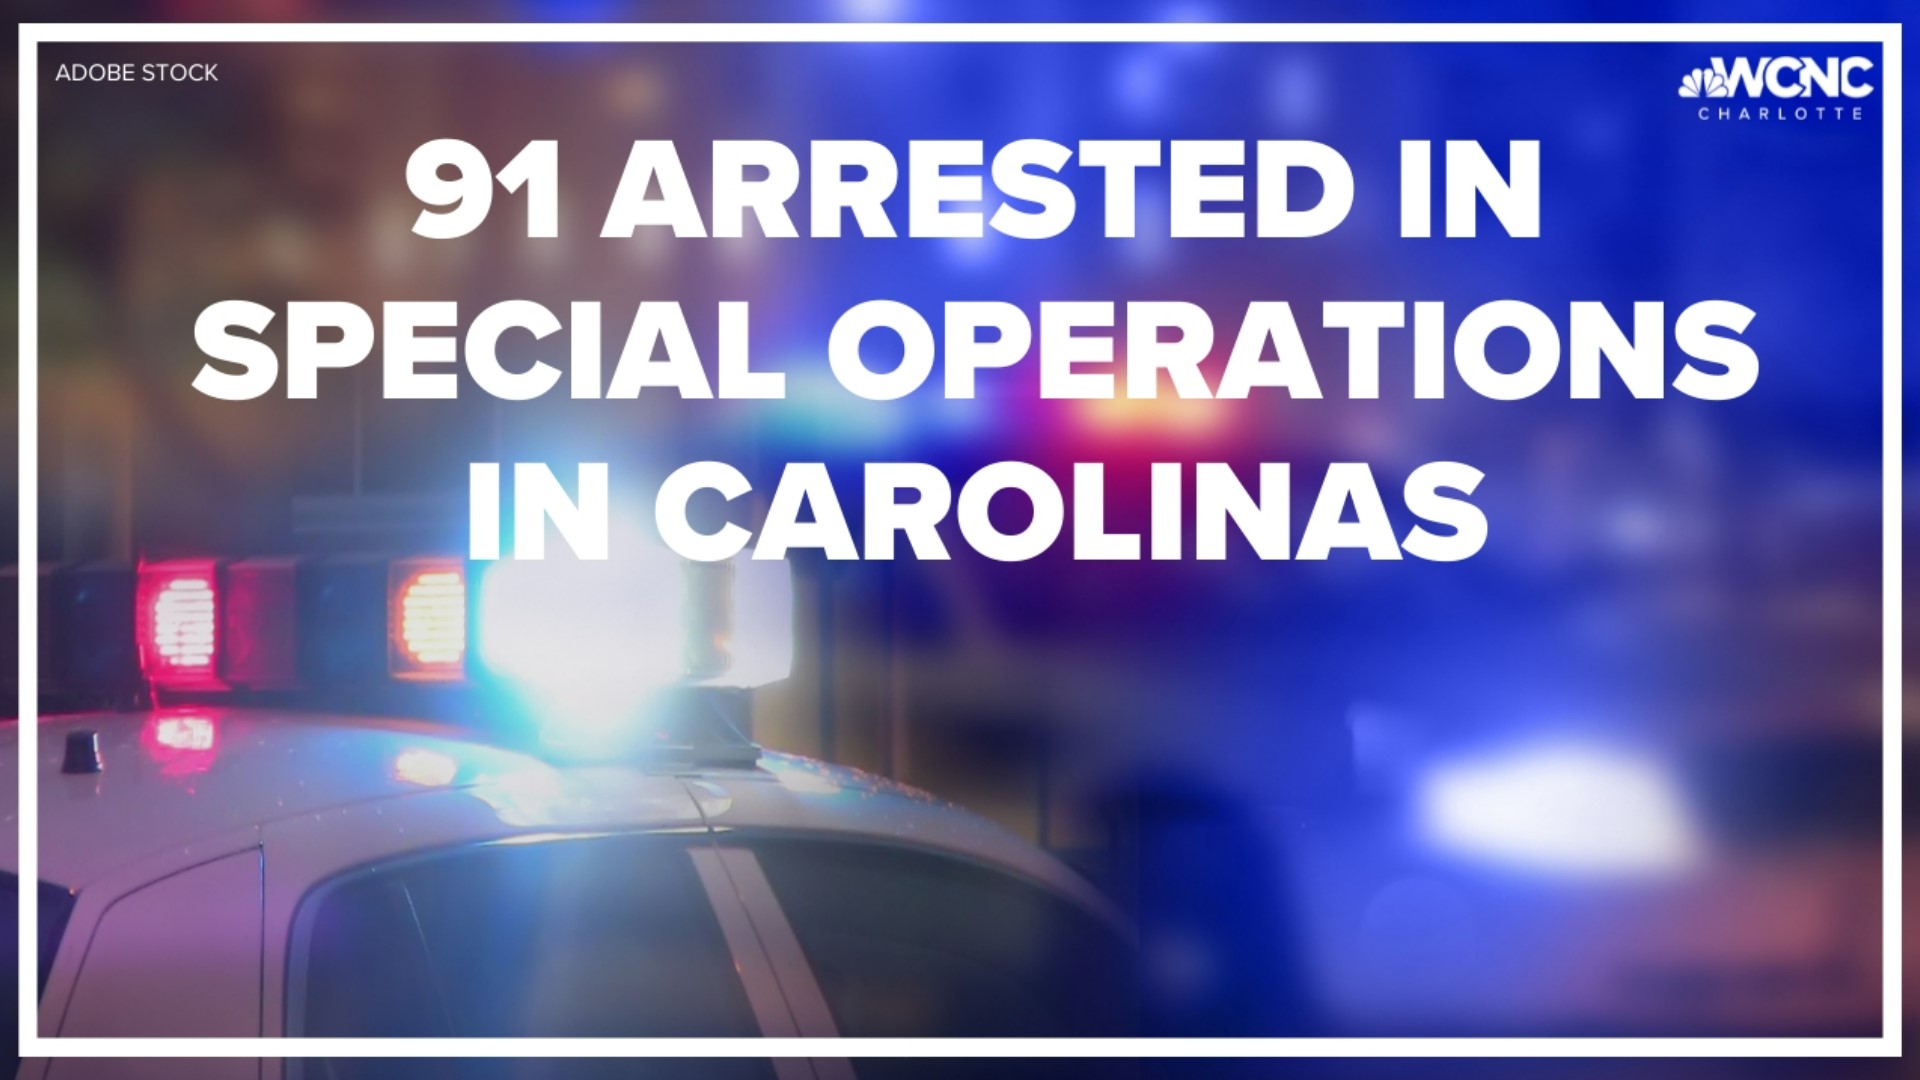 Federal, state and local law enforcement agencies from across the Carolinas joined forced to arrest 91 suspects. Their charges included homicide and robbery.